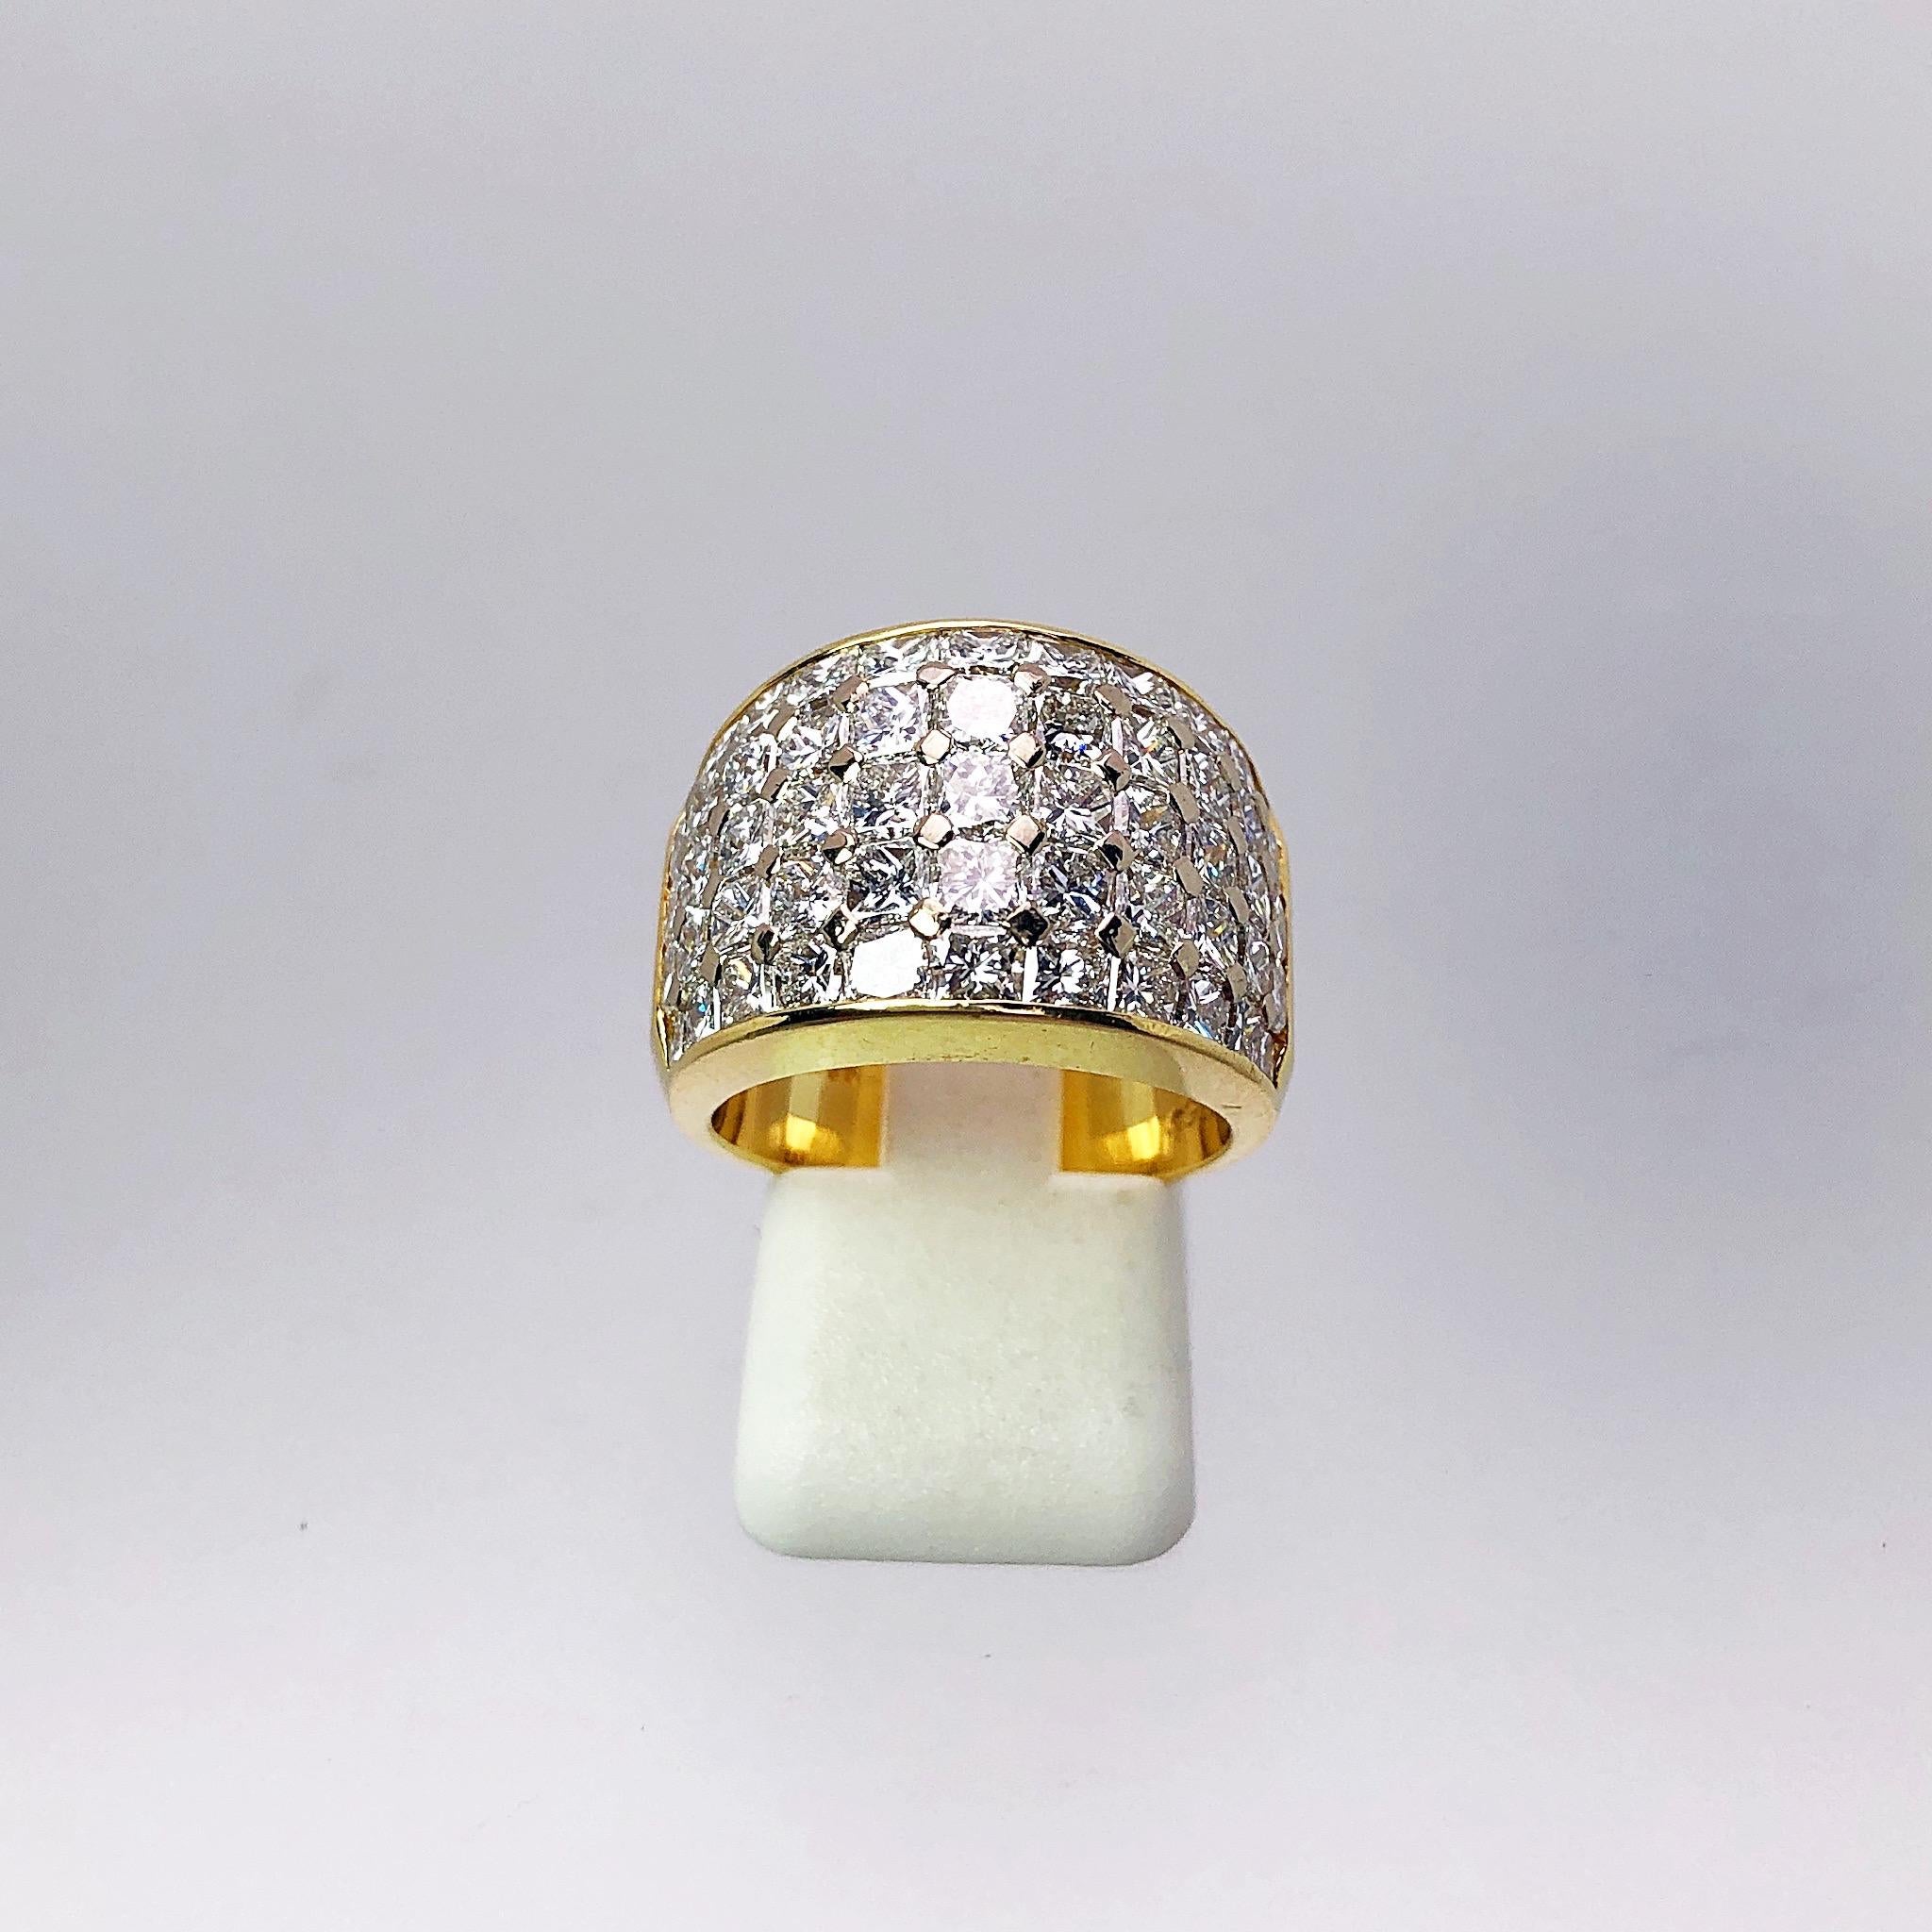 Designed by Nova, this 18 karat yellow gold ring is a showstopper with 5 rows of Princess Cut Diamonds. The Diamonds are invisibly set. The 5 rows have a slight domed taper from 14 to 11.5 mm at the Diamond section. The ring has the Nova hallmark on